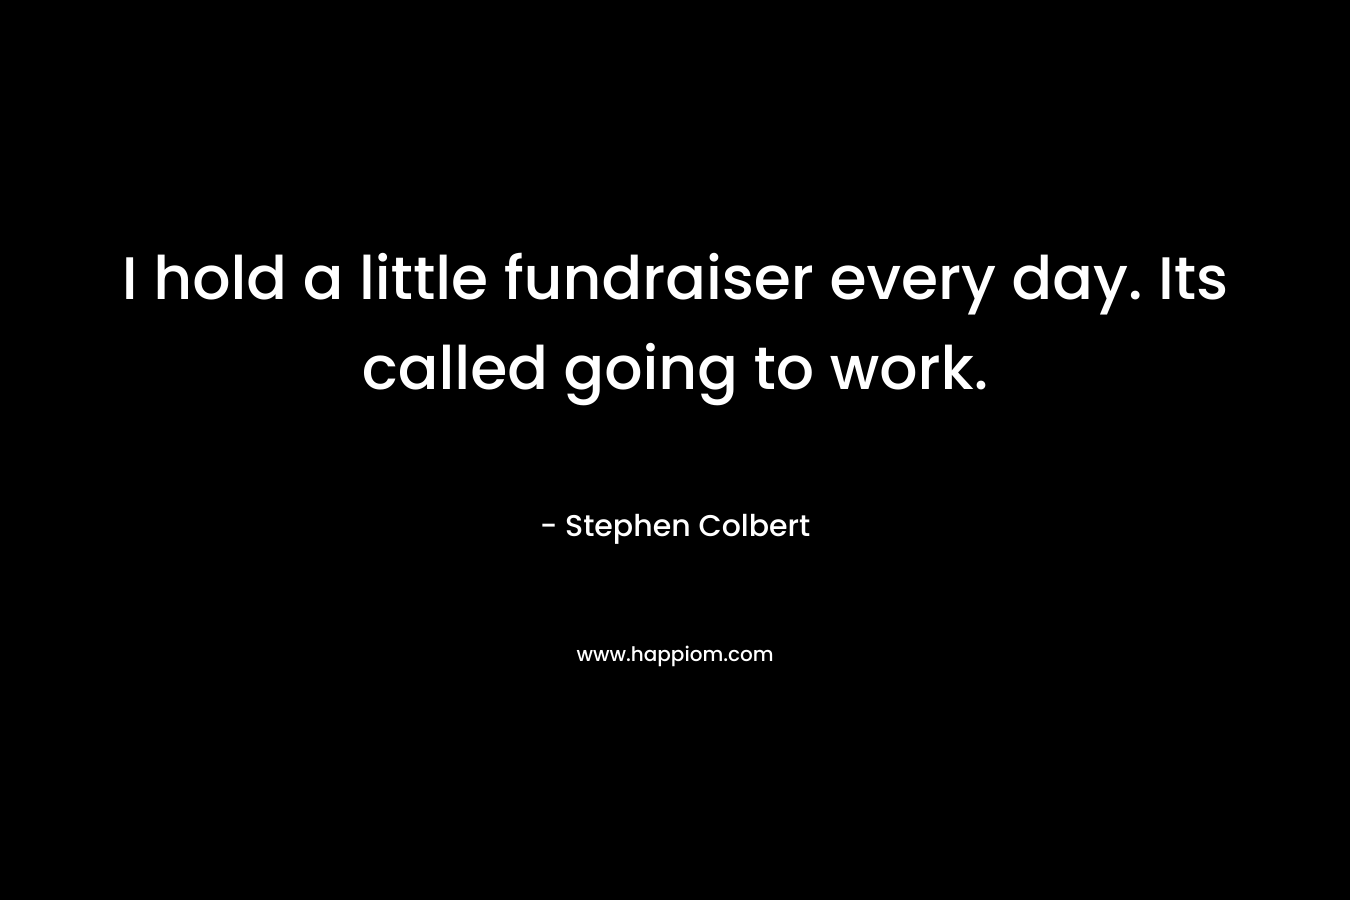 I hold a little fundraiser every day. Its called going to work.